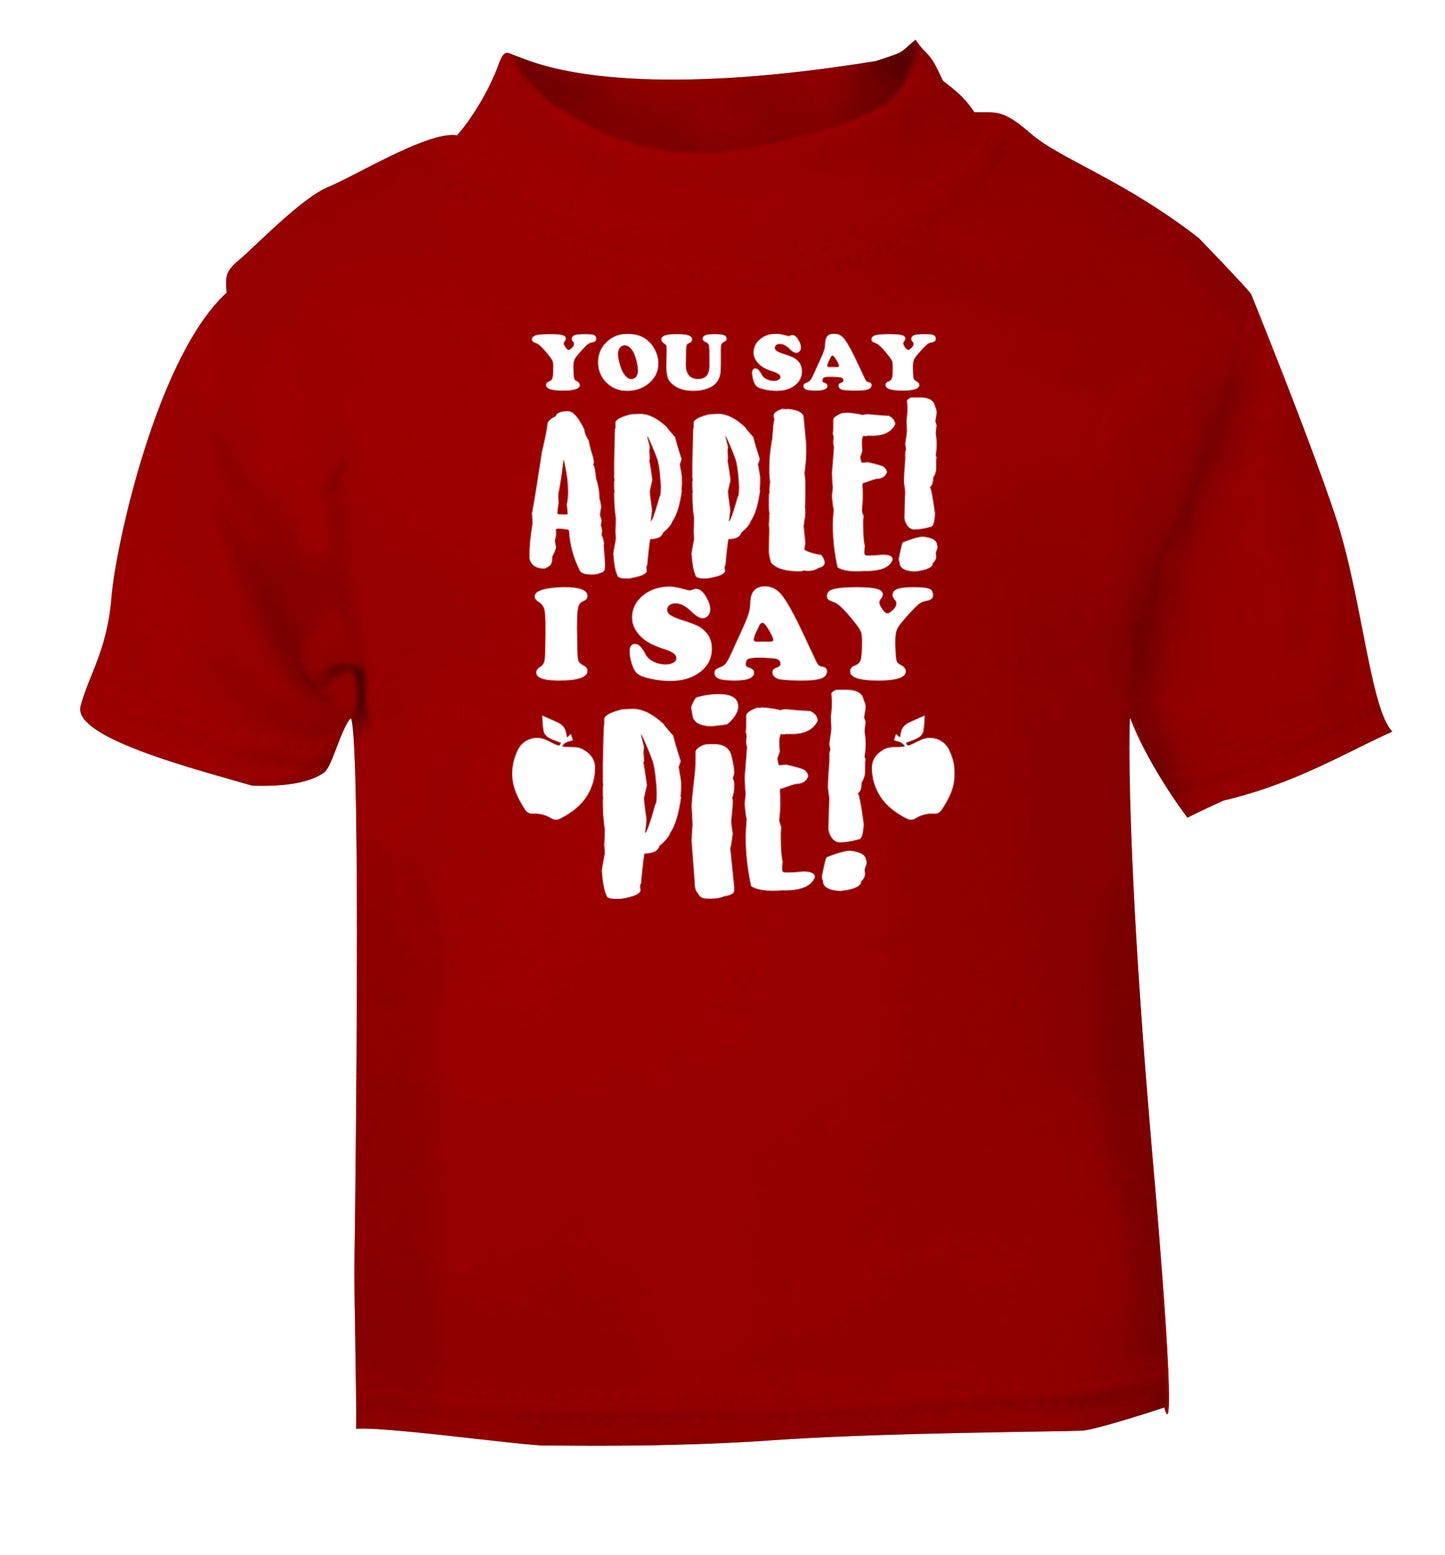 You say apple I say pie! red Baby Toddler Tshirt 2 Years